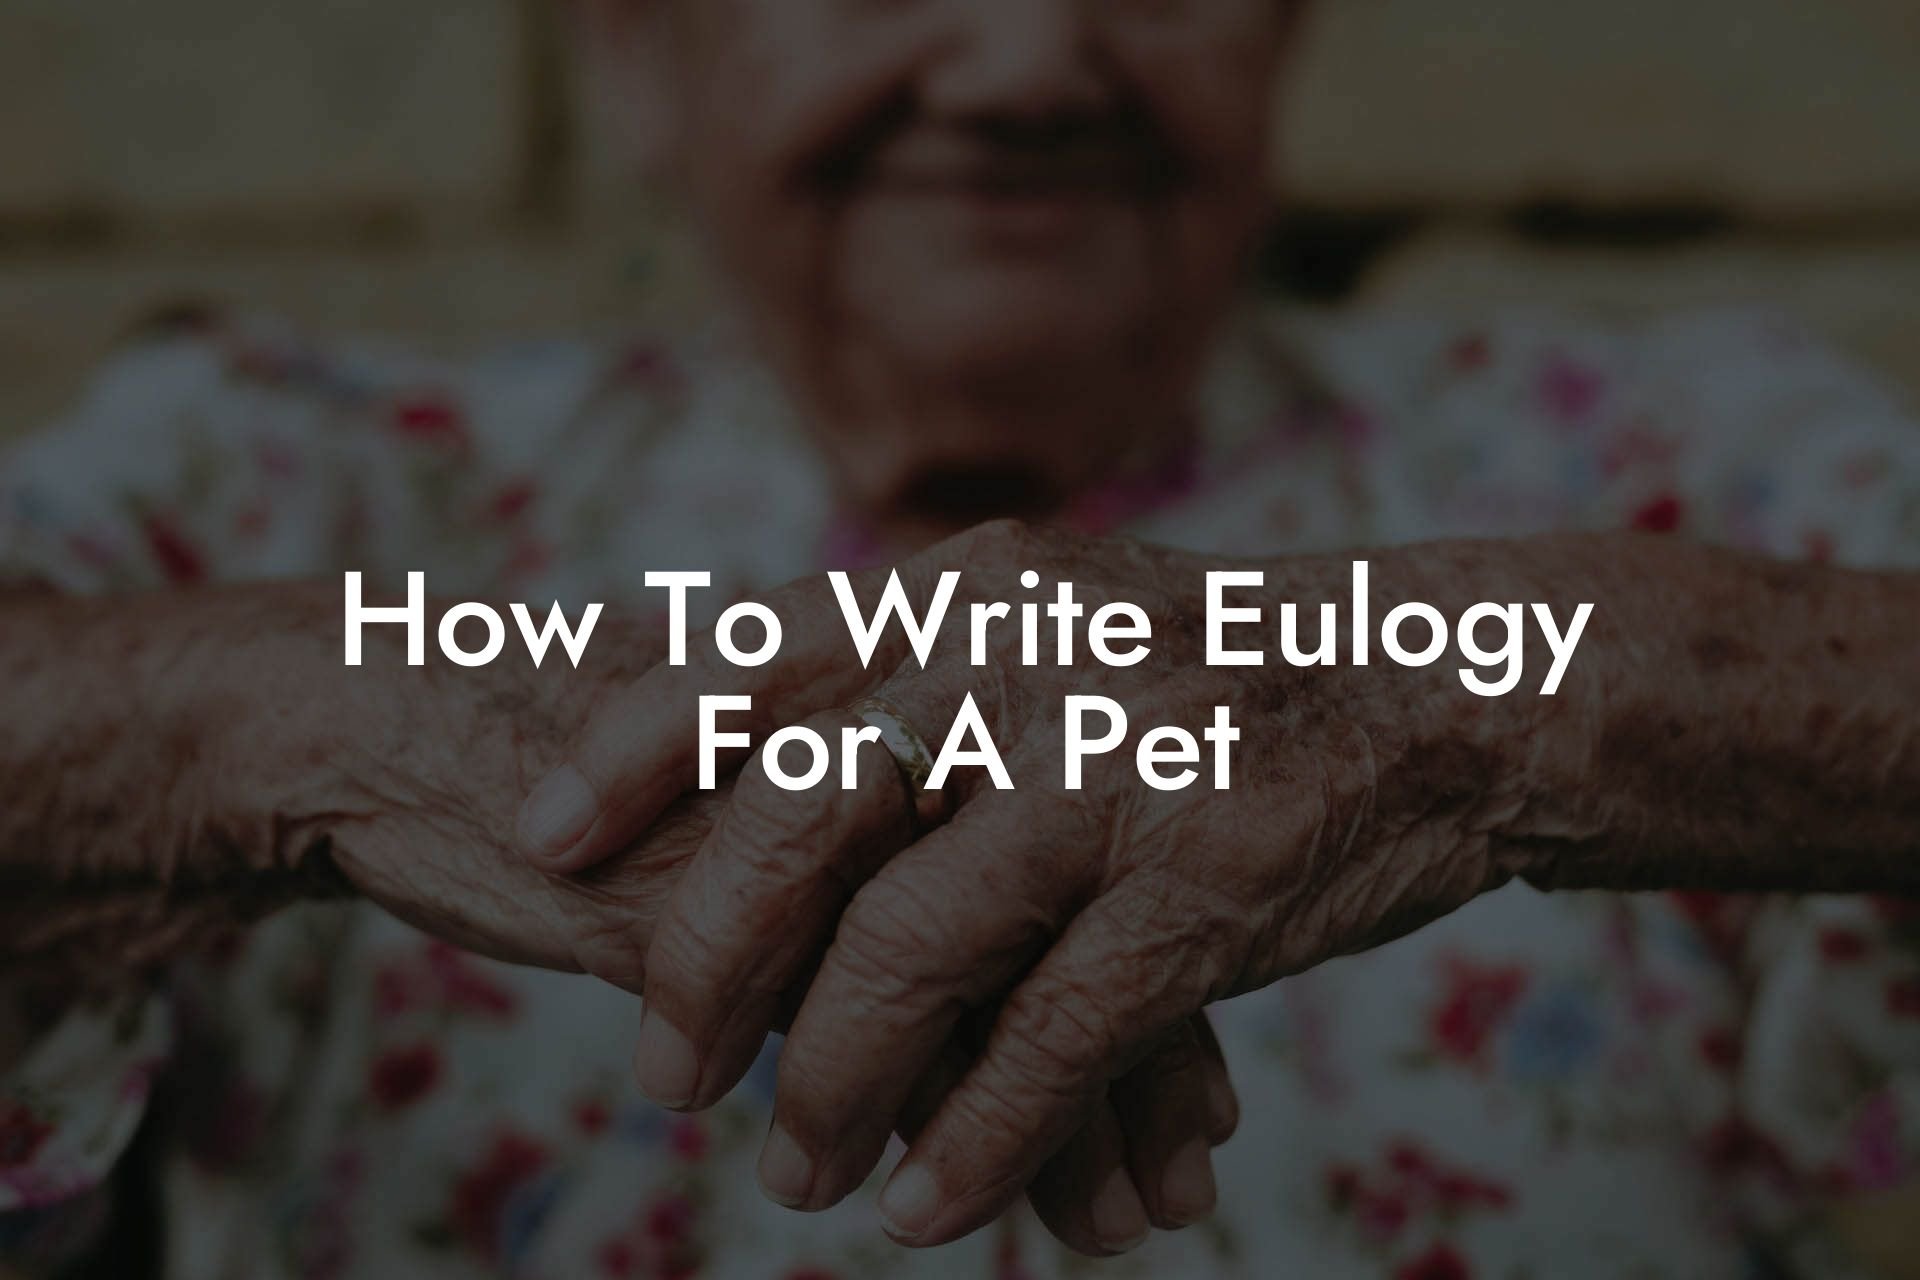 How To Write Eulogy For A Pet